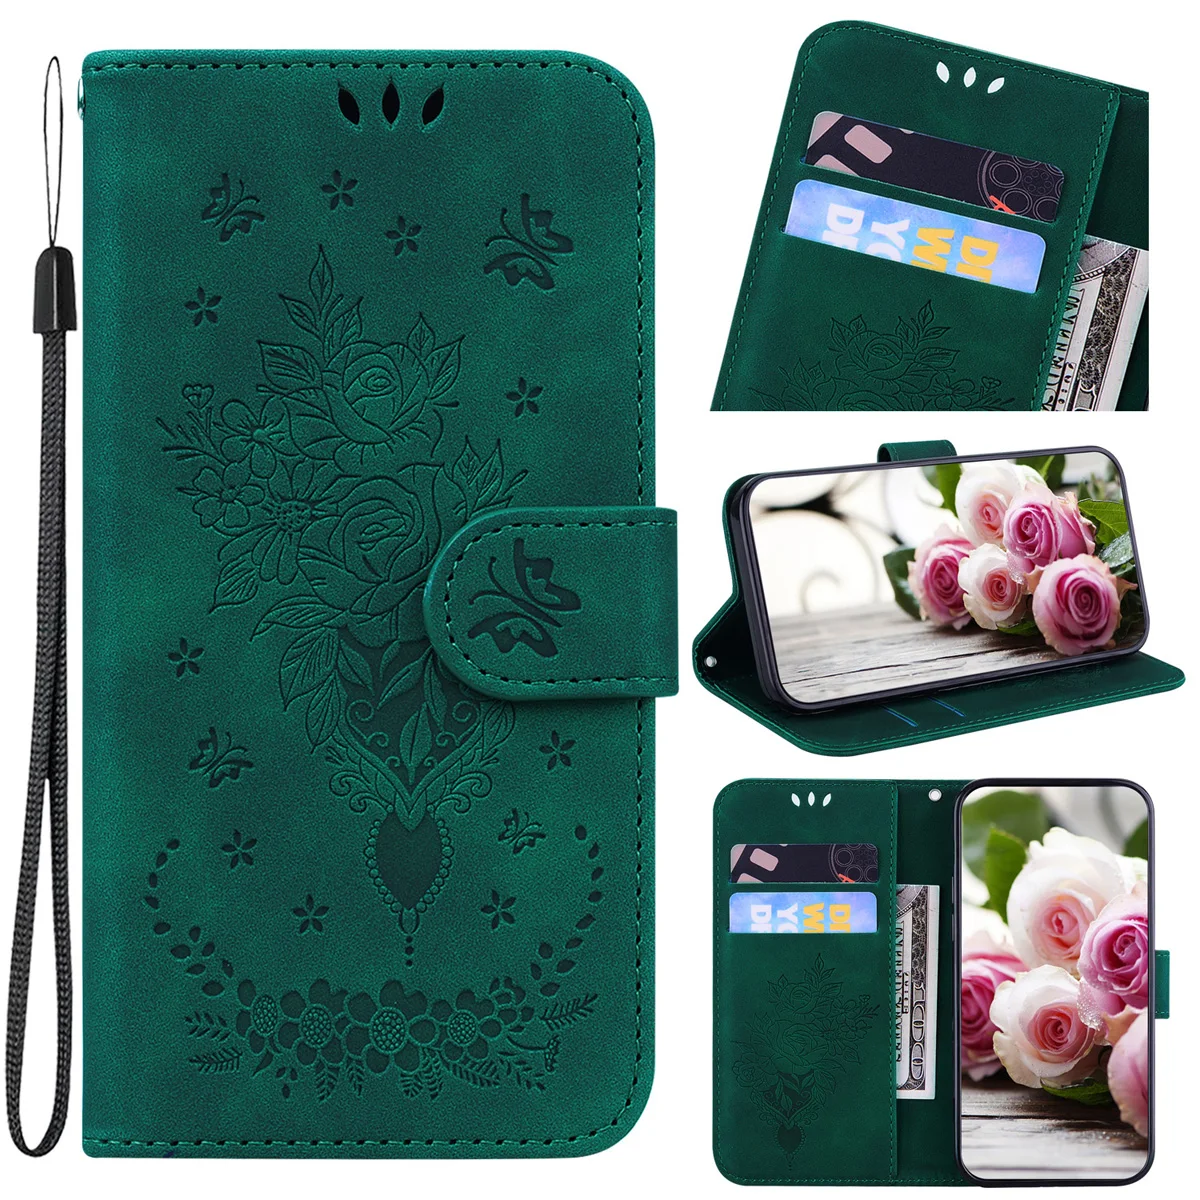 Jessleiphone Cover For Sony Xperia Ace 3 1 Iv L4 L3 5 10 Flip Wallet Pu  Leather Phone Case For Xperia 10 Iii 5 Iii 1 Iii Coque - Mobile Phone Cases  & Covers - AliExpress